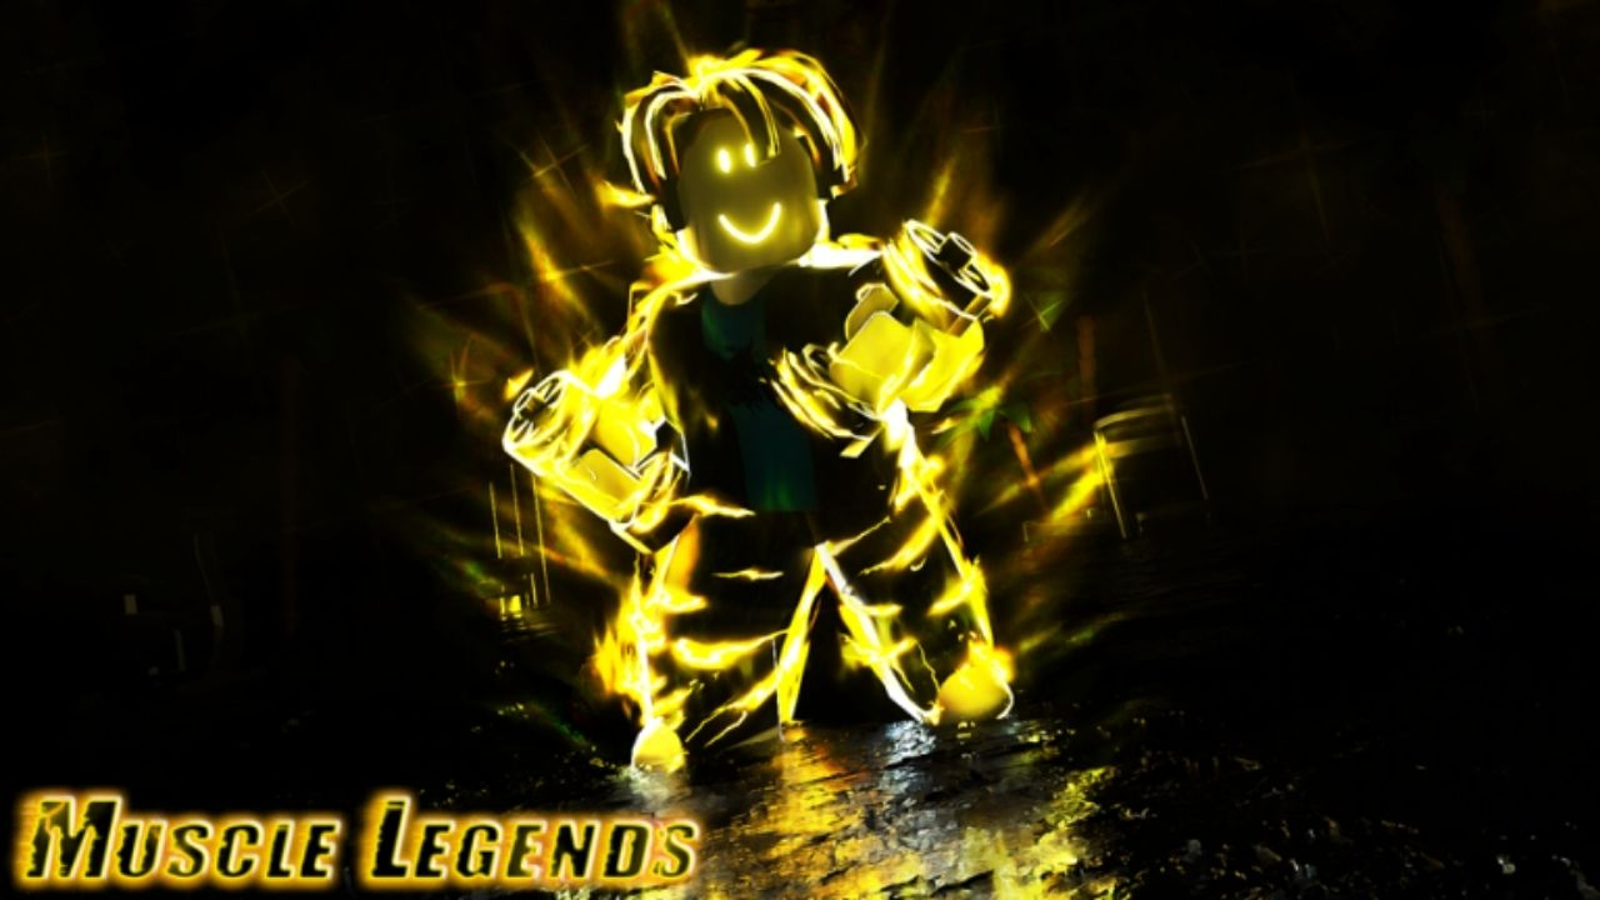 Download King legacy mod roblx Free for Android - King legacy mod roblx APK  Download 